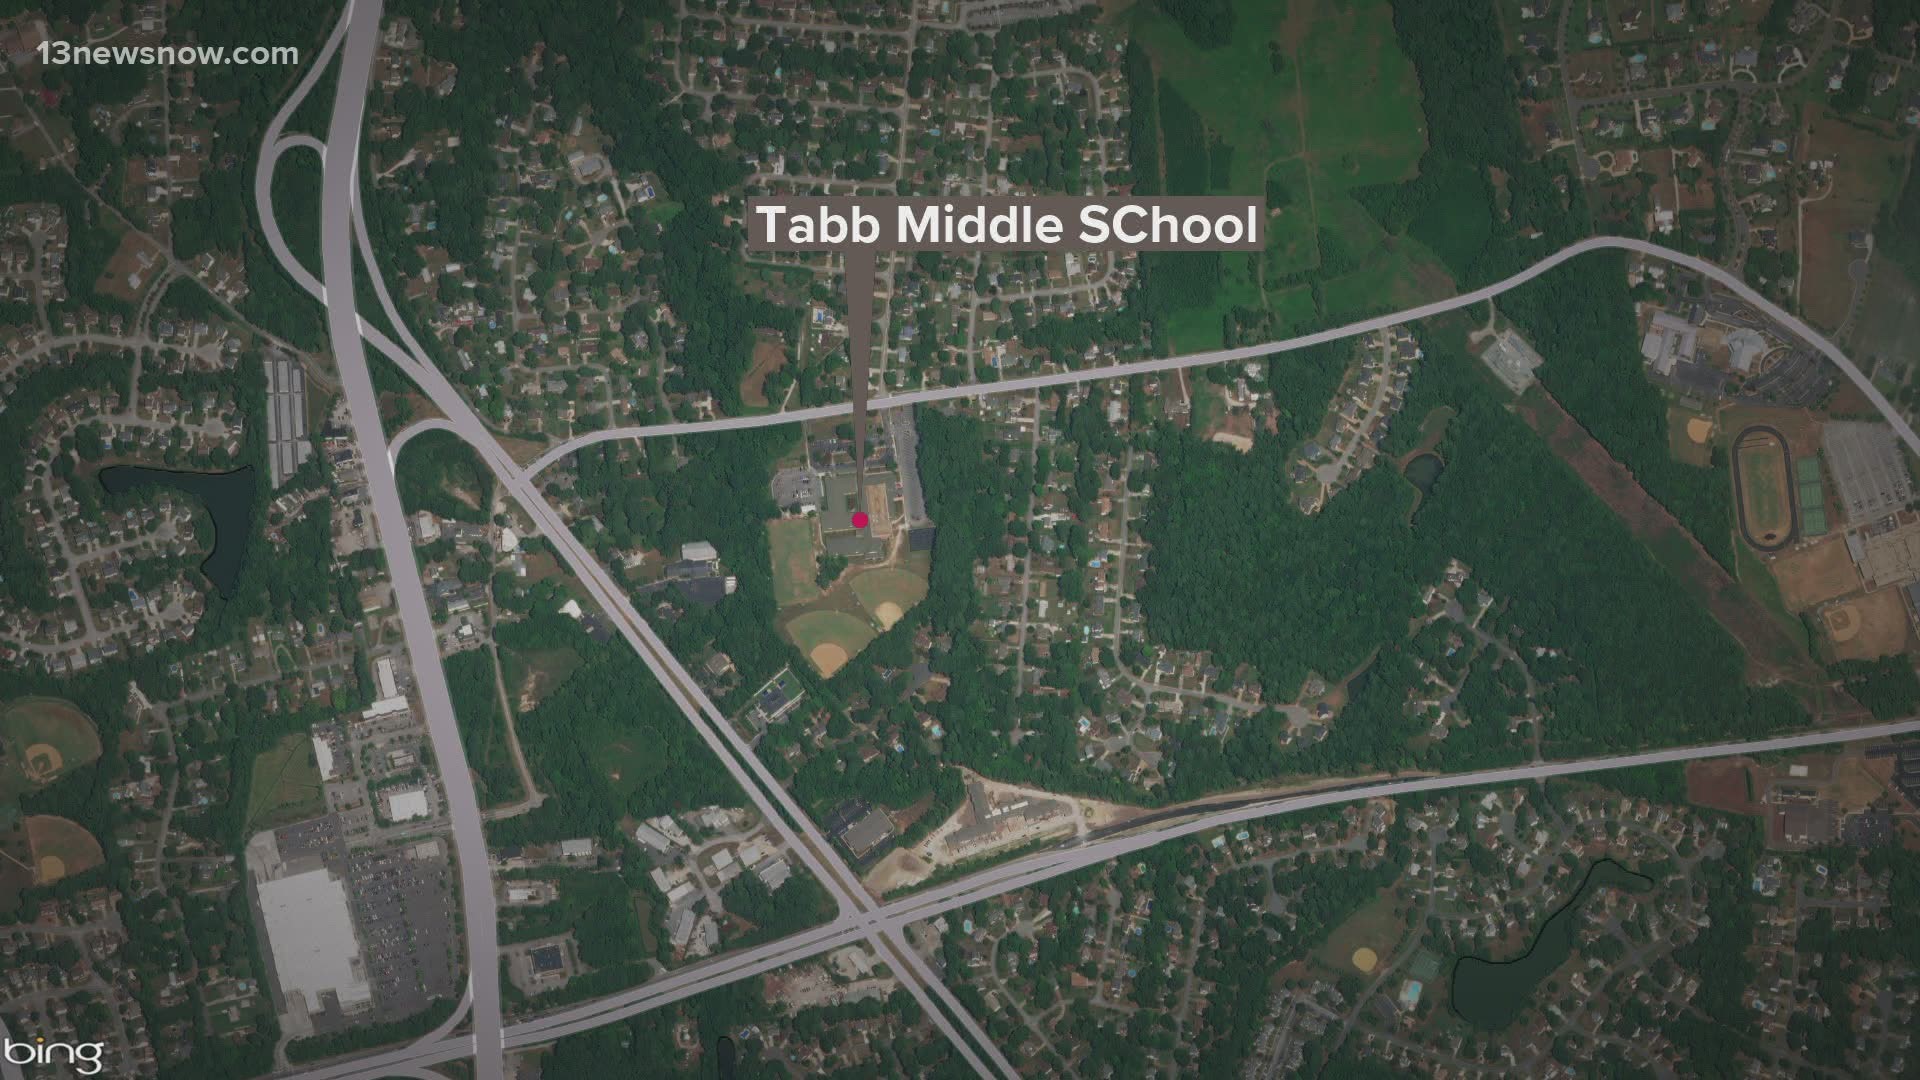 Tabb Middle School staff members heard gunfire near the basketball courts and contacted the York-Poquoson Sheriff's Office.